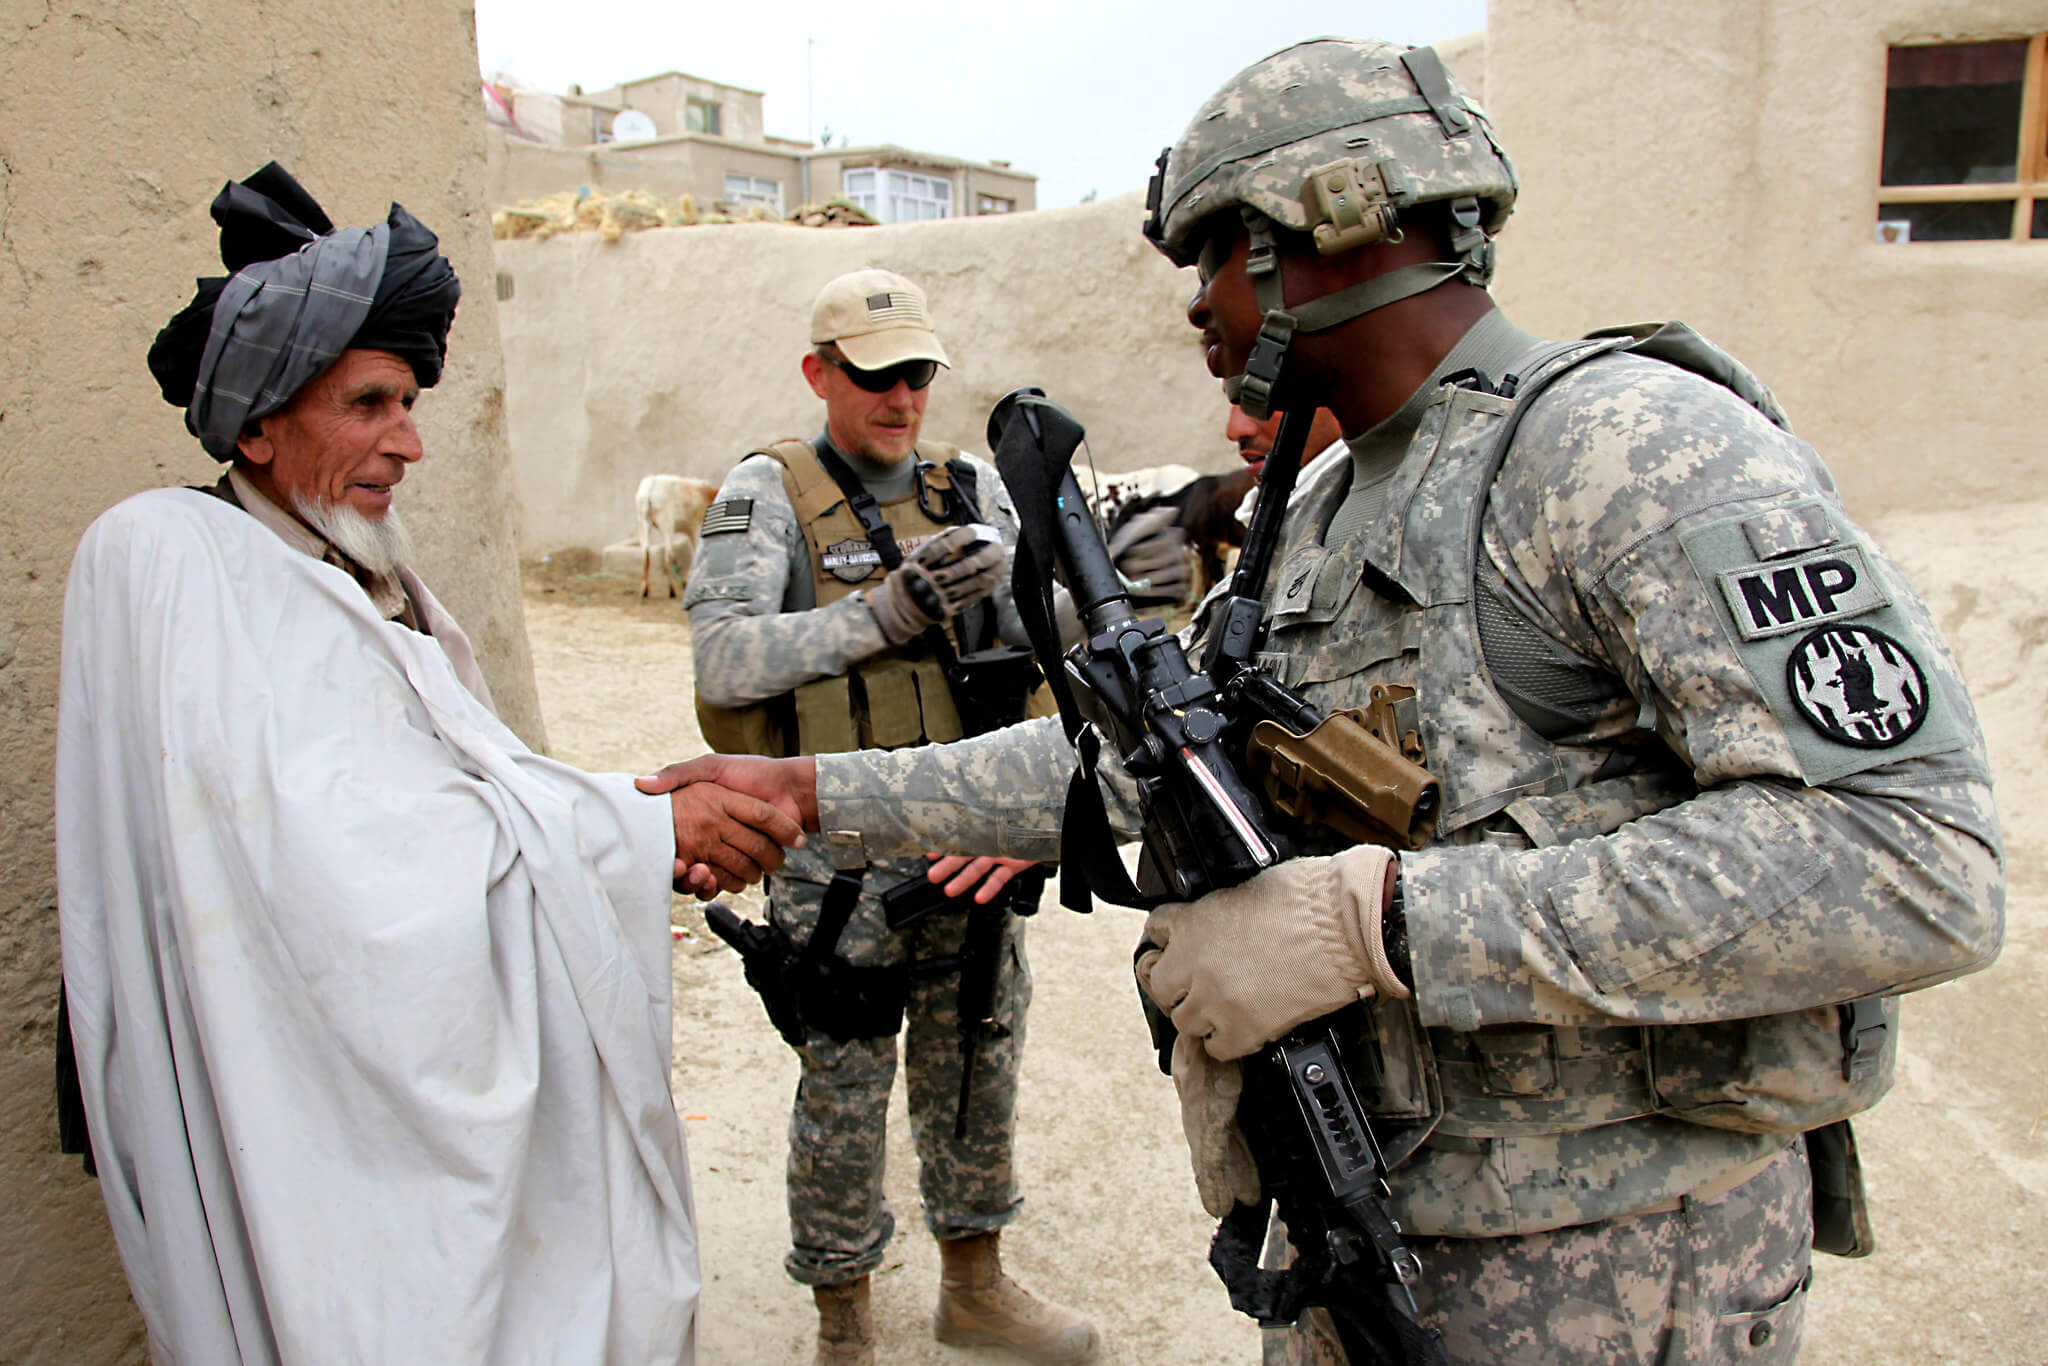 U.S. Army Staff Sgt. Michael Baldwin shakes hands with an elder in the village of Mirsaleh in the Logar province of Afghanistan June 6, 2010.